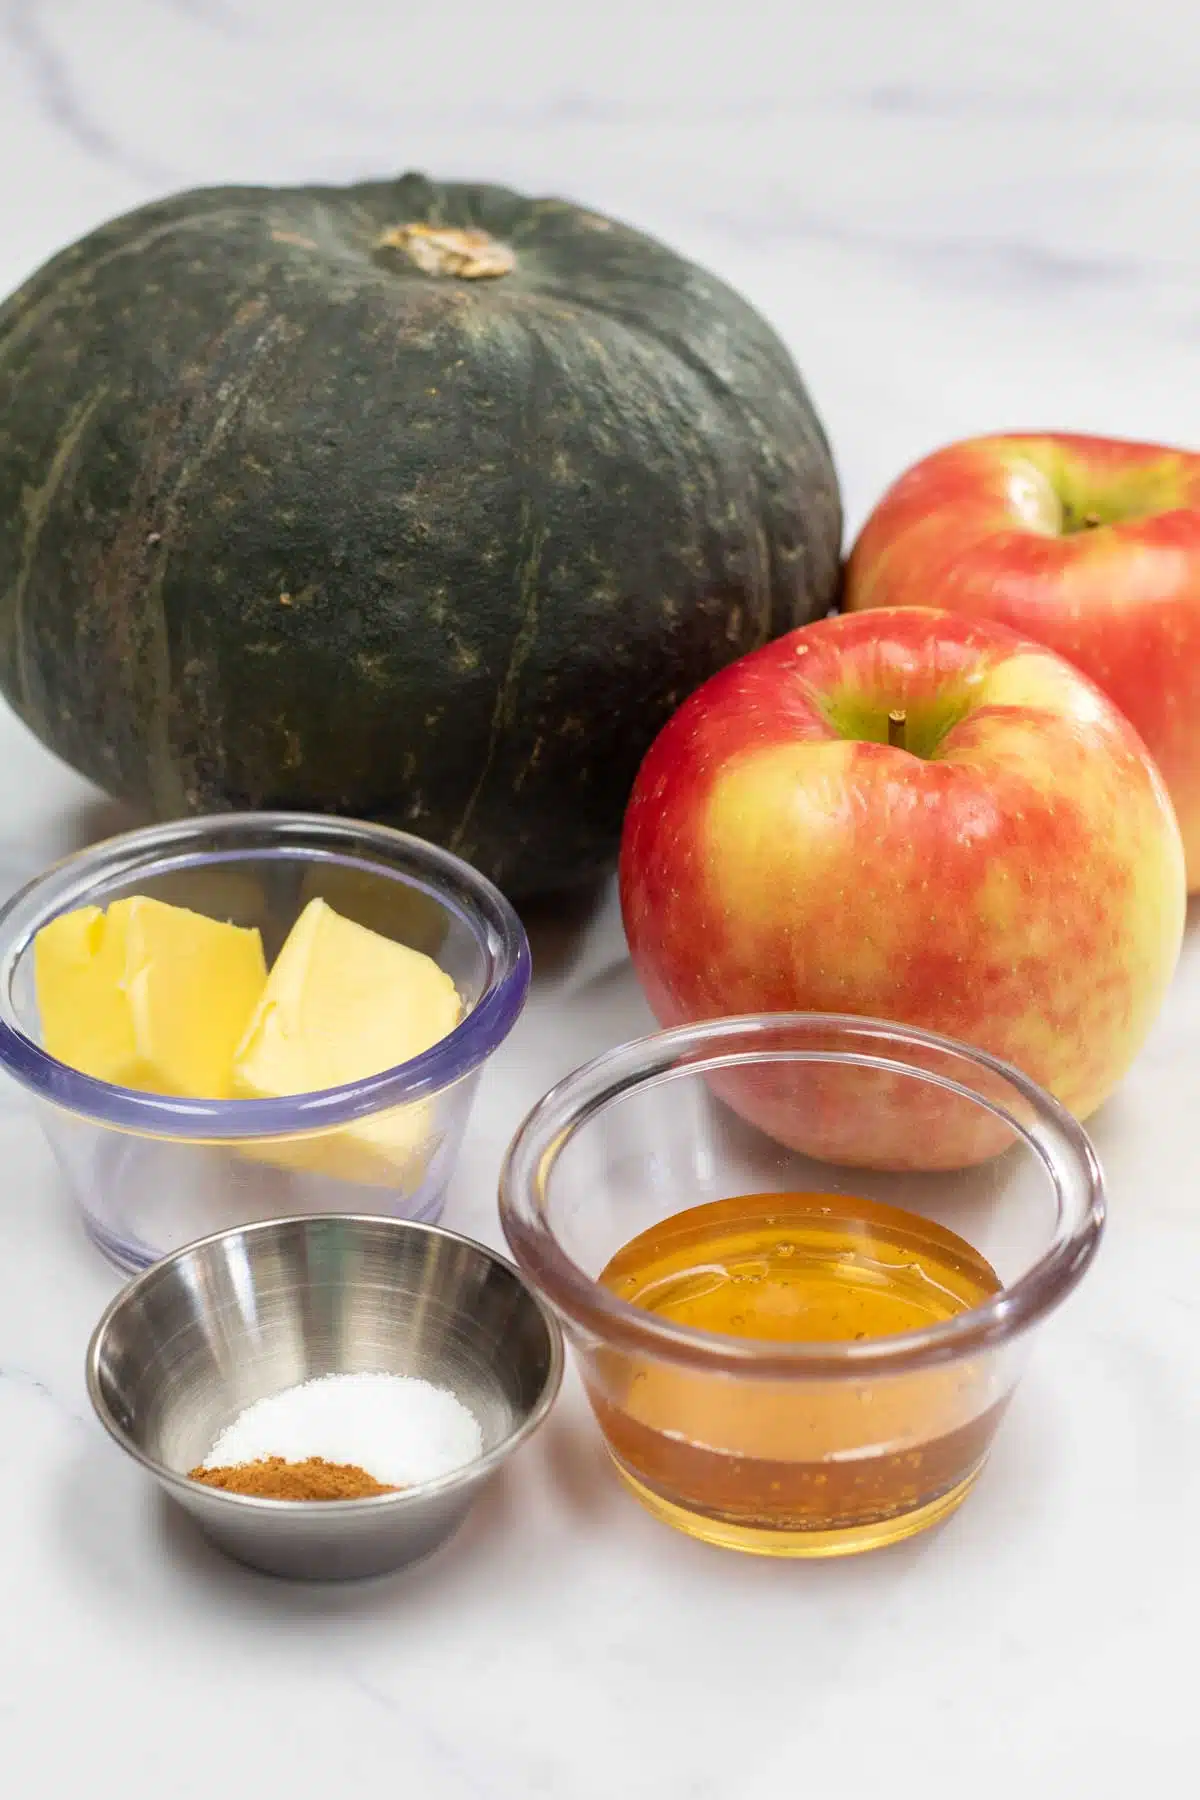 Tall image of ingredients needed for baked buttercup squash with apples.